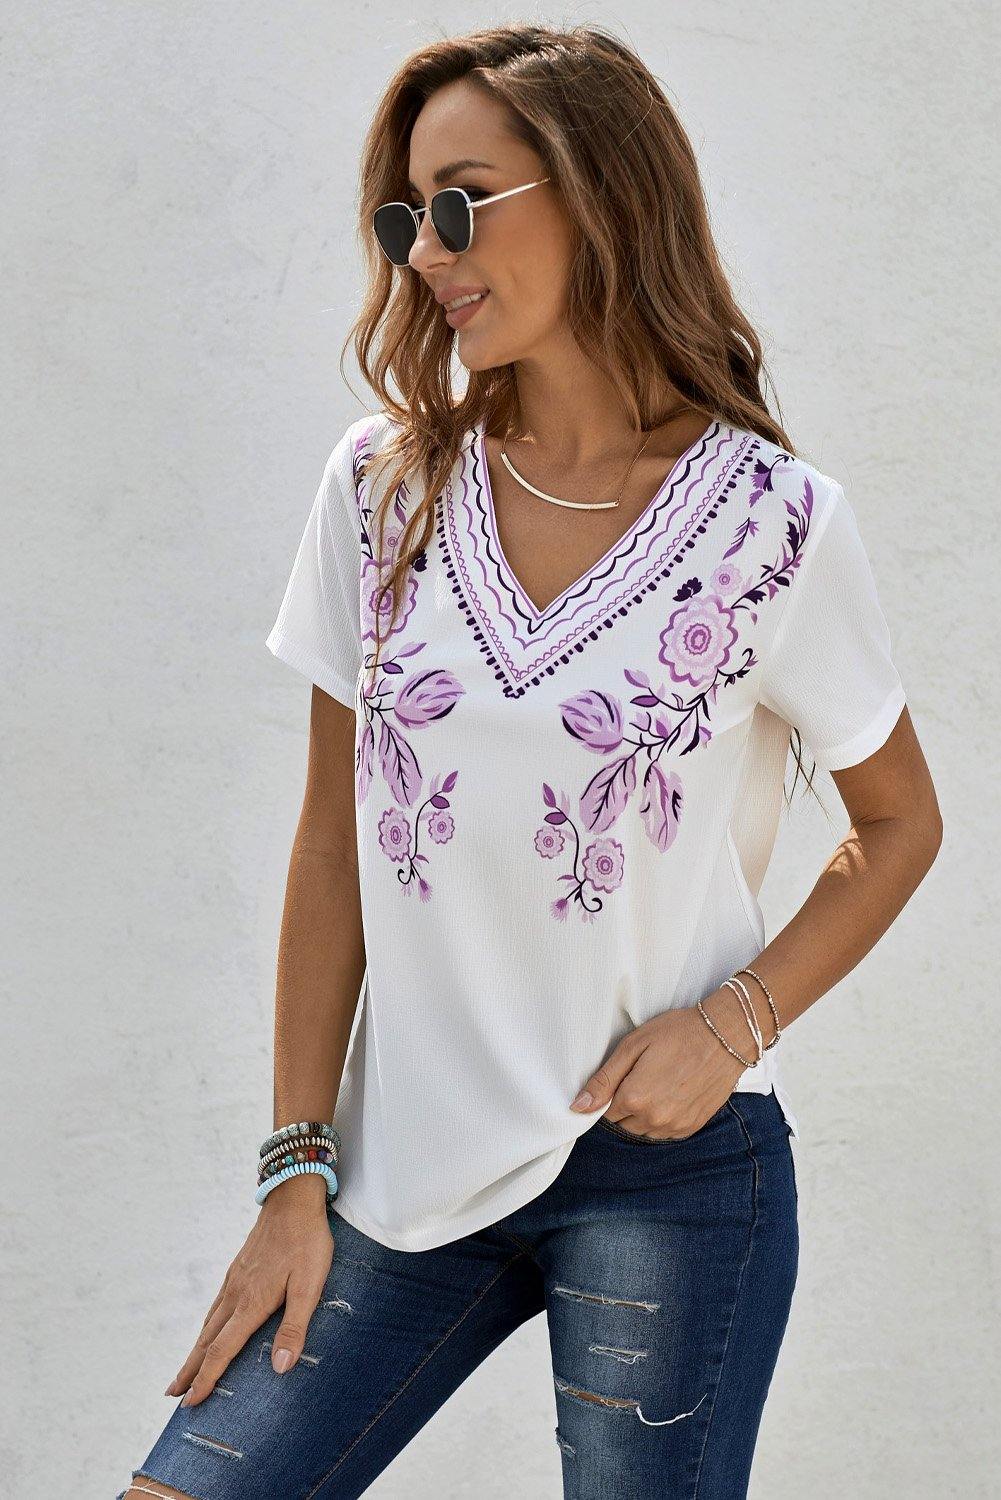 Floral Embroidery V Neck Short Sleeve Top - L & M Kee, LLC